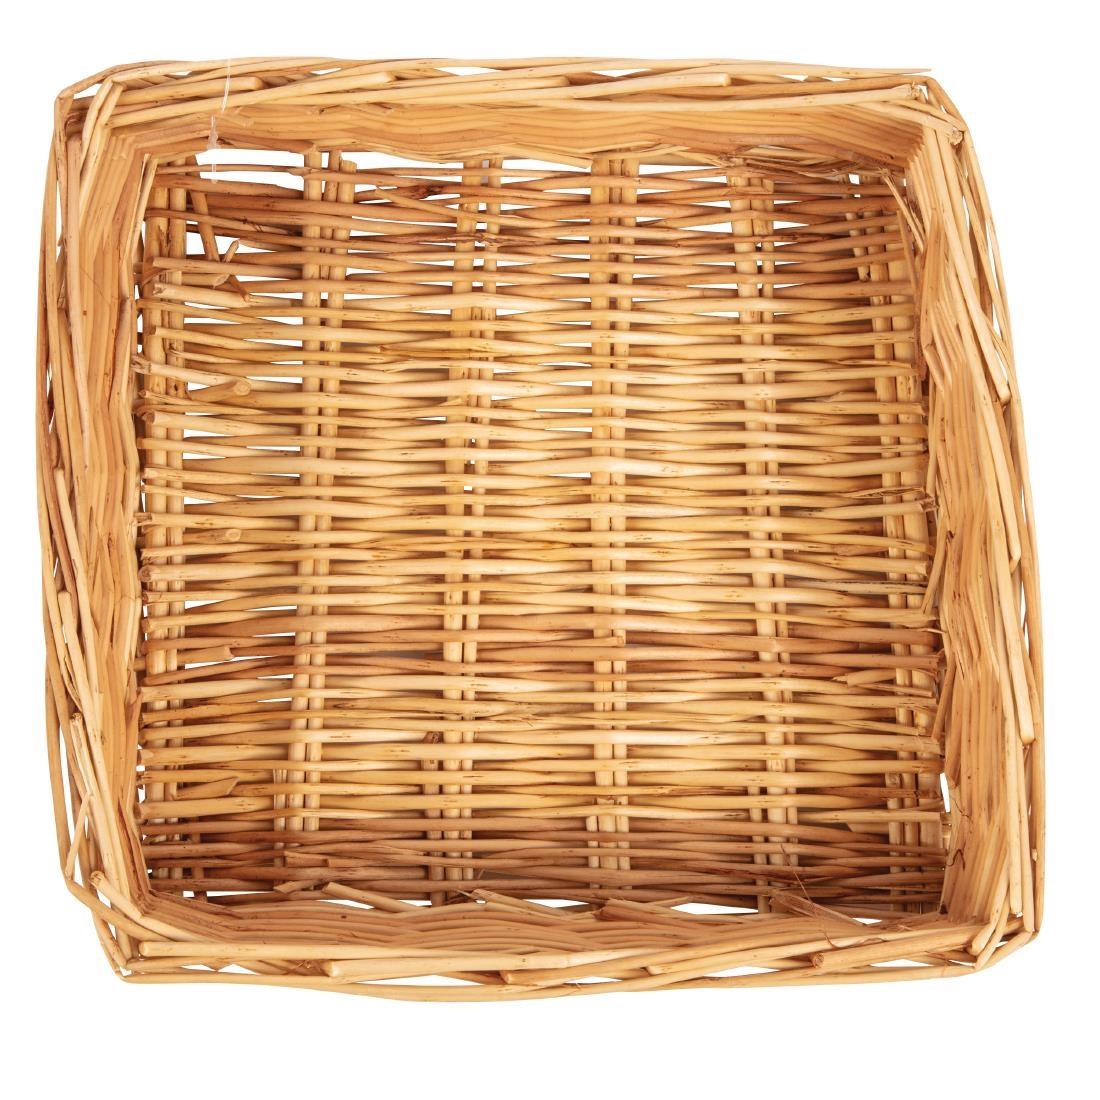 Willow Square Table Basket - P765  - 2